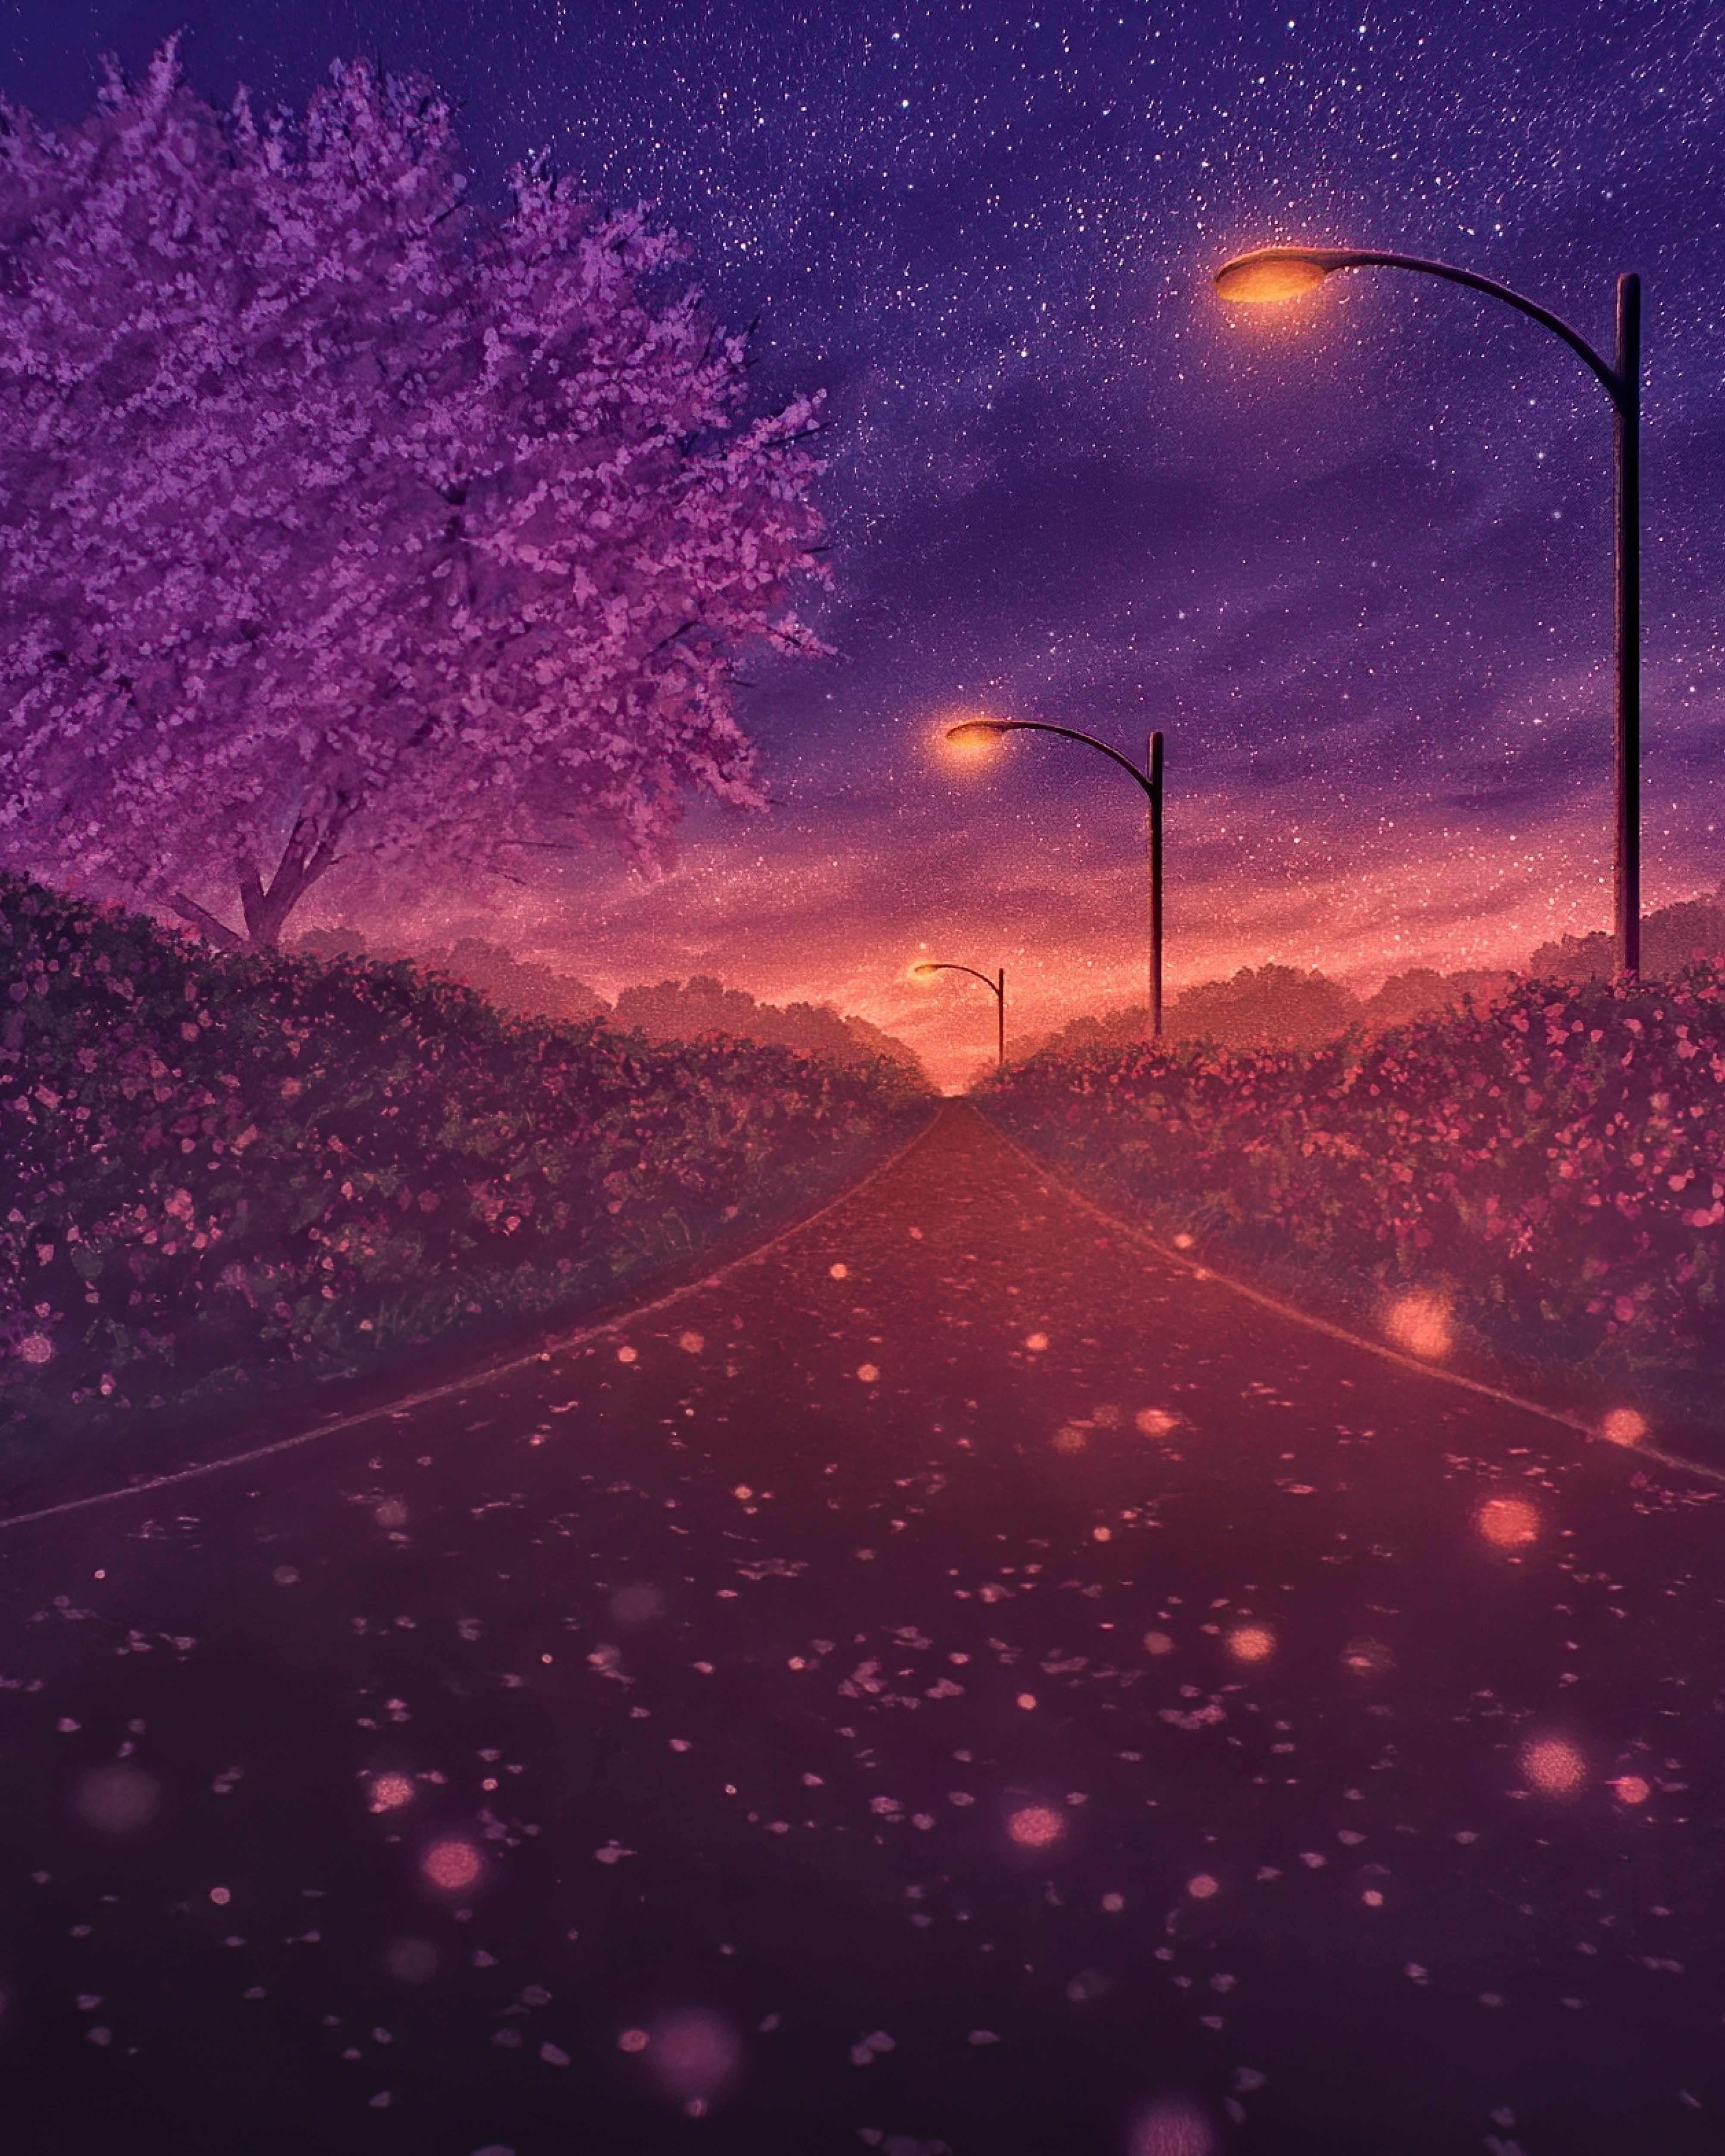 Blossom Artistic Path 4000x5000 Resolution Wallpaper, HD Artist 4K Wallpaper, Image, Photo and Background